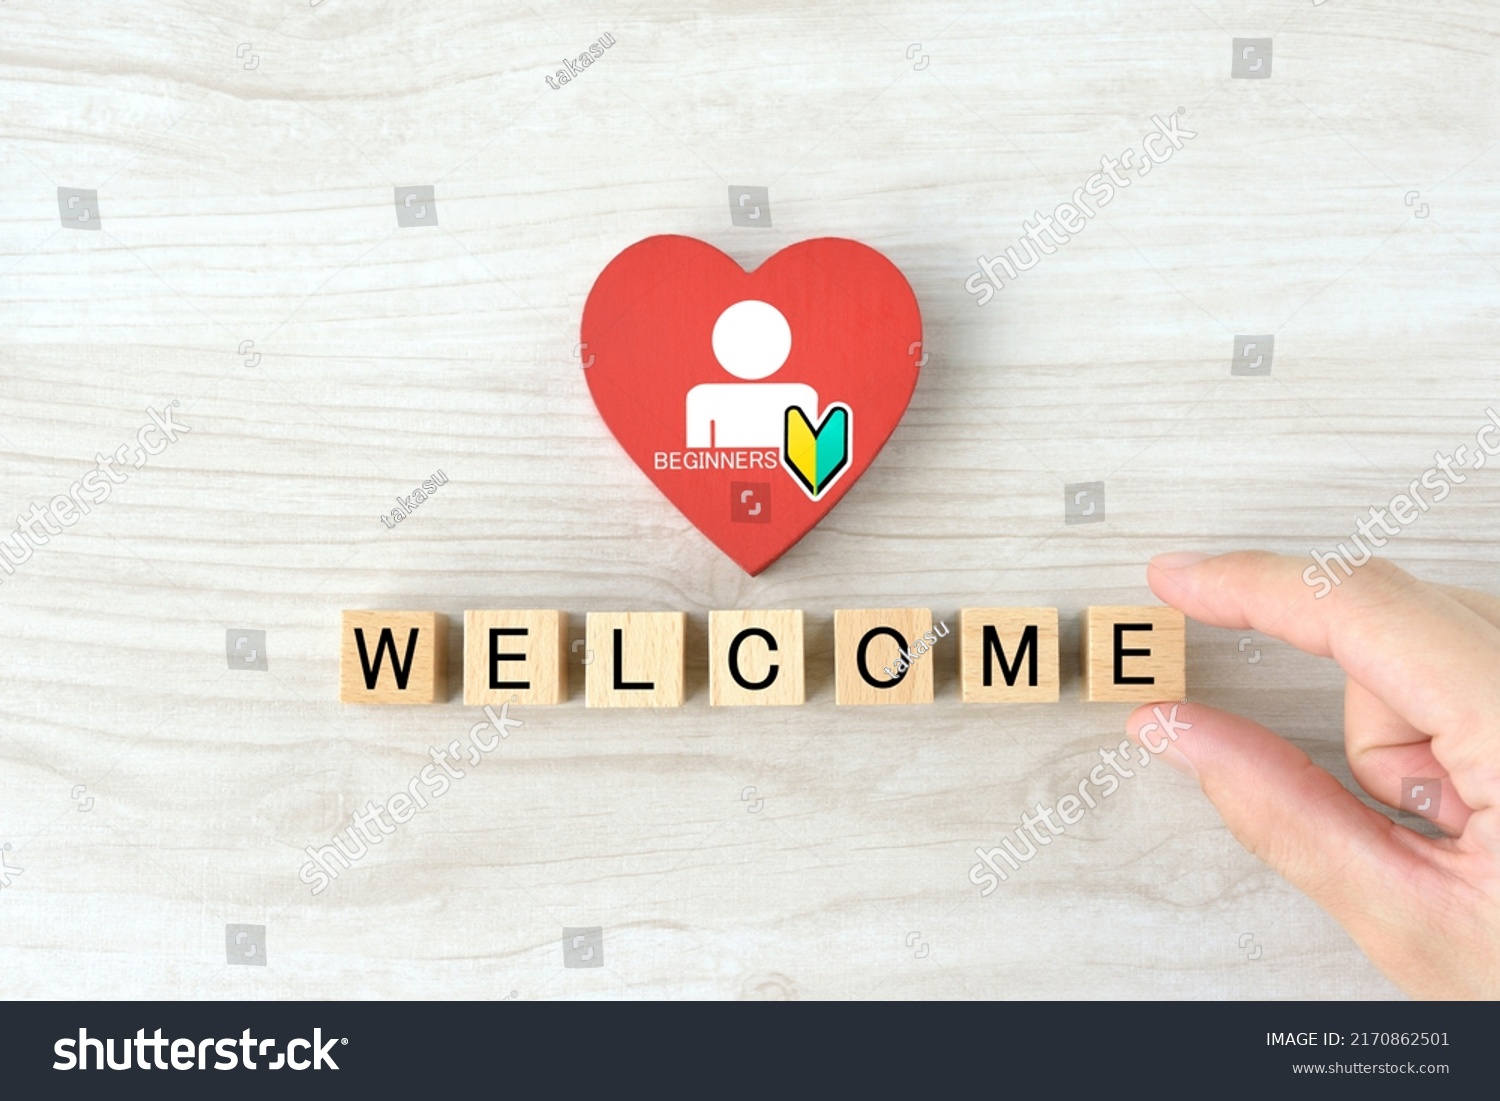 Businessman's hand with human pictogram and Japanese beginners mark drawn on heart object and wooden blocks with "WELCOME" word #2170862501